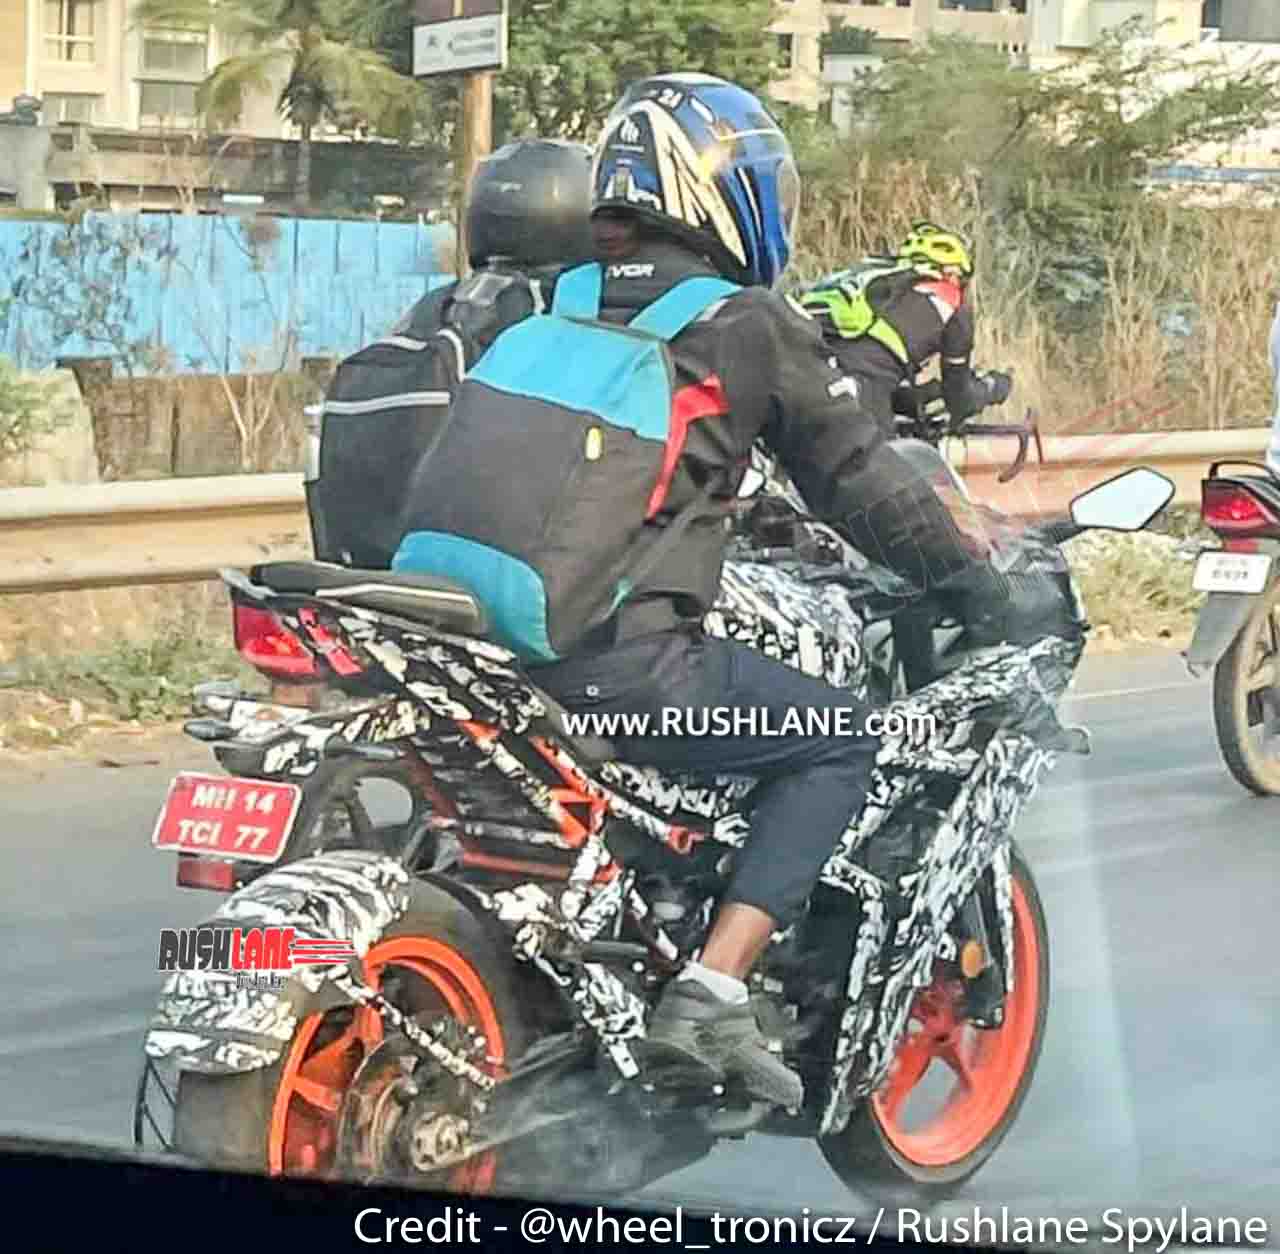 Next-Gen KTM RC 200 Sportbike Spotted Testing in India